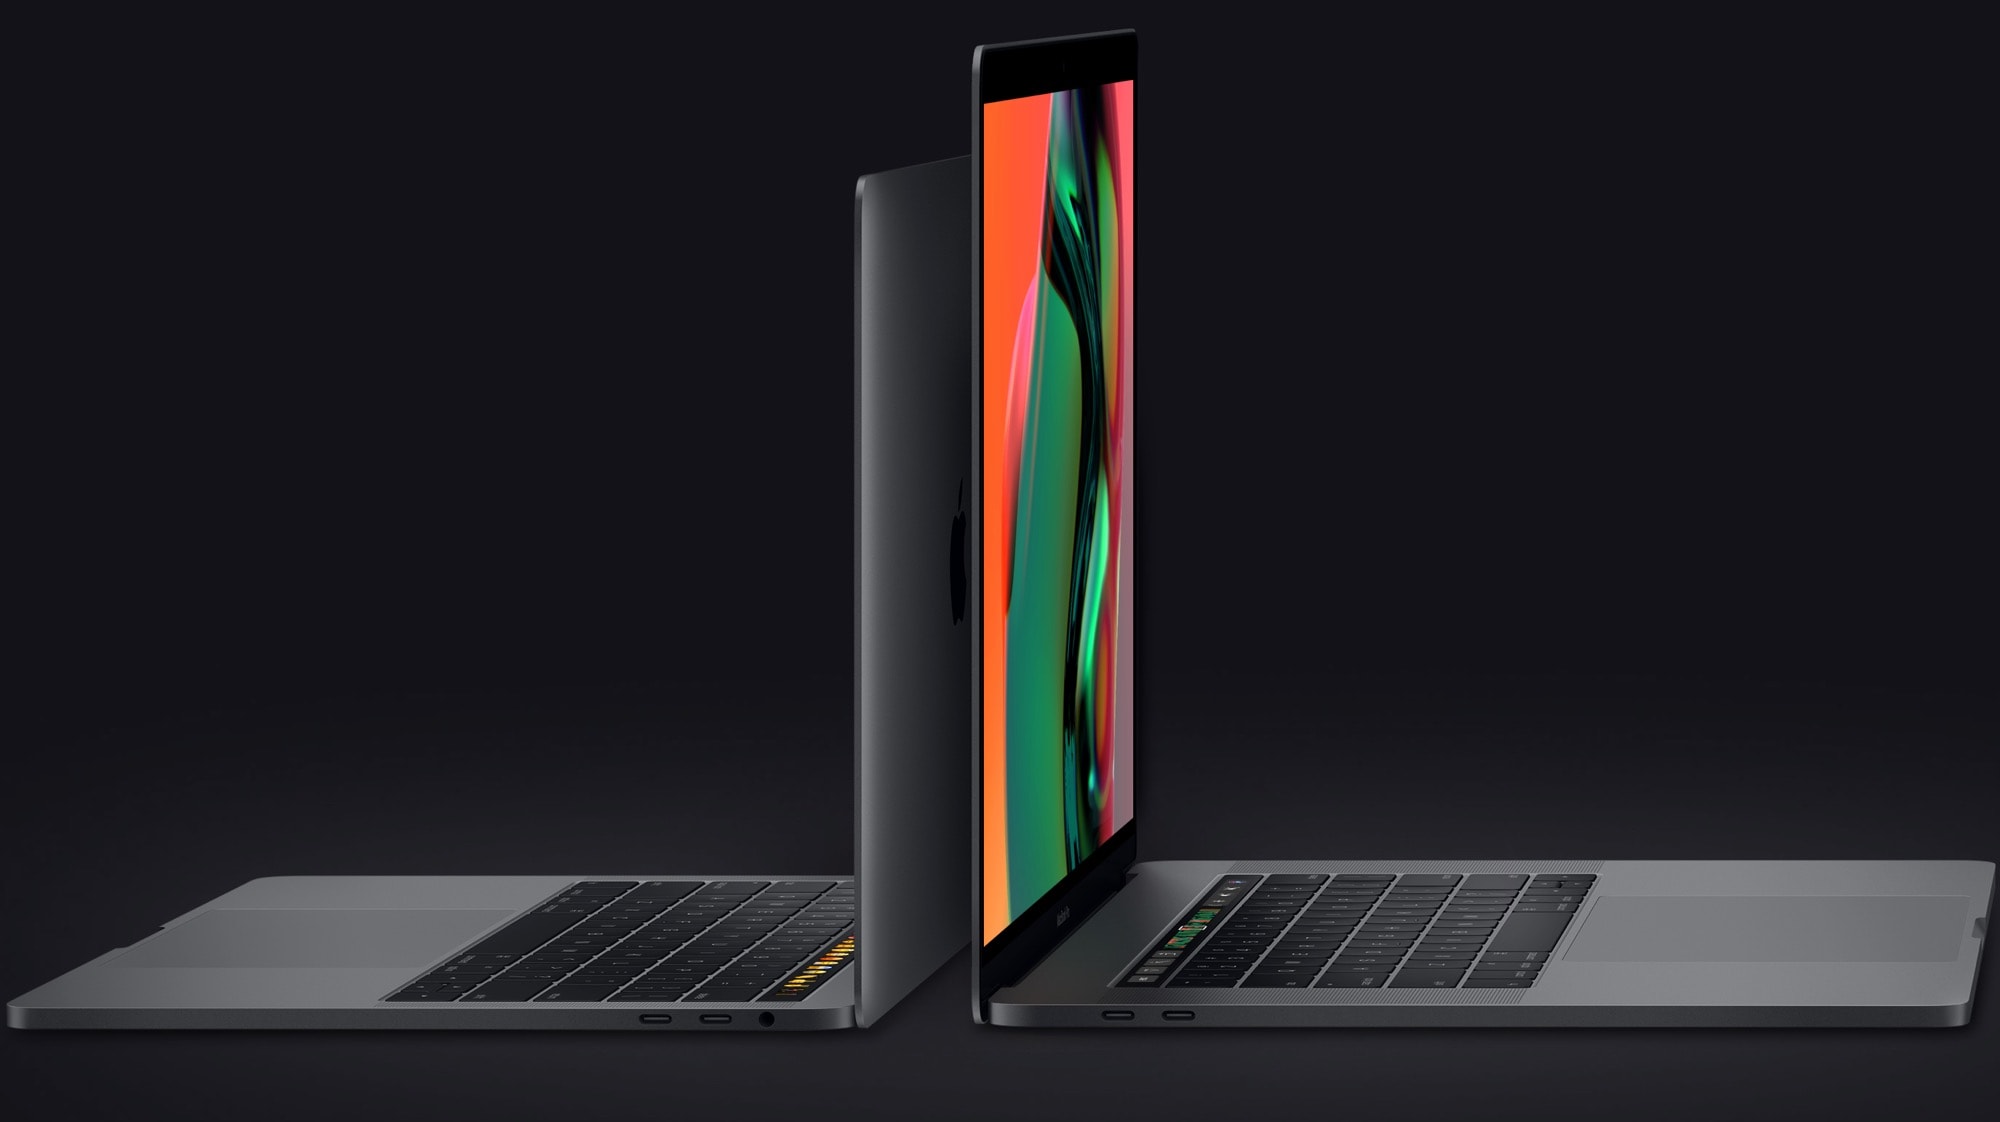   MacBook Pro adds a touch bar and a better screen. 